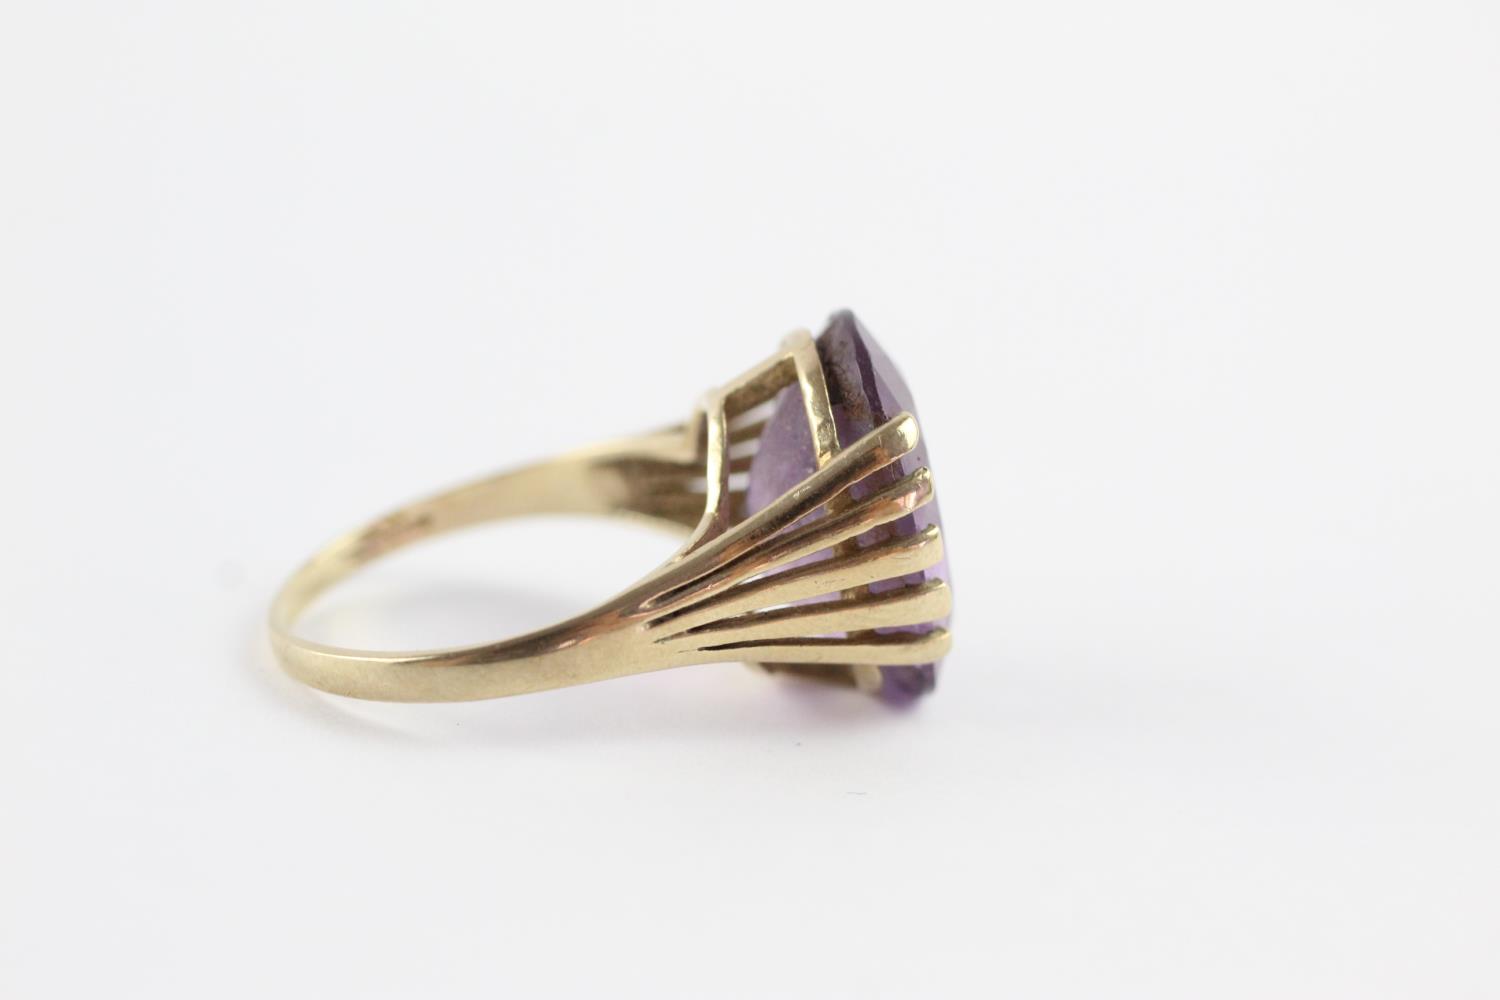 9ct gold amethyst high profile setting cocktail ring (3.8g) size O - Image 4 of 9